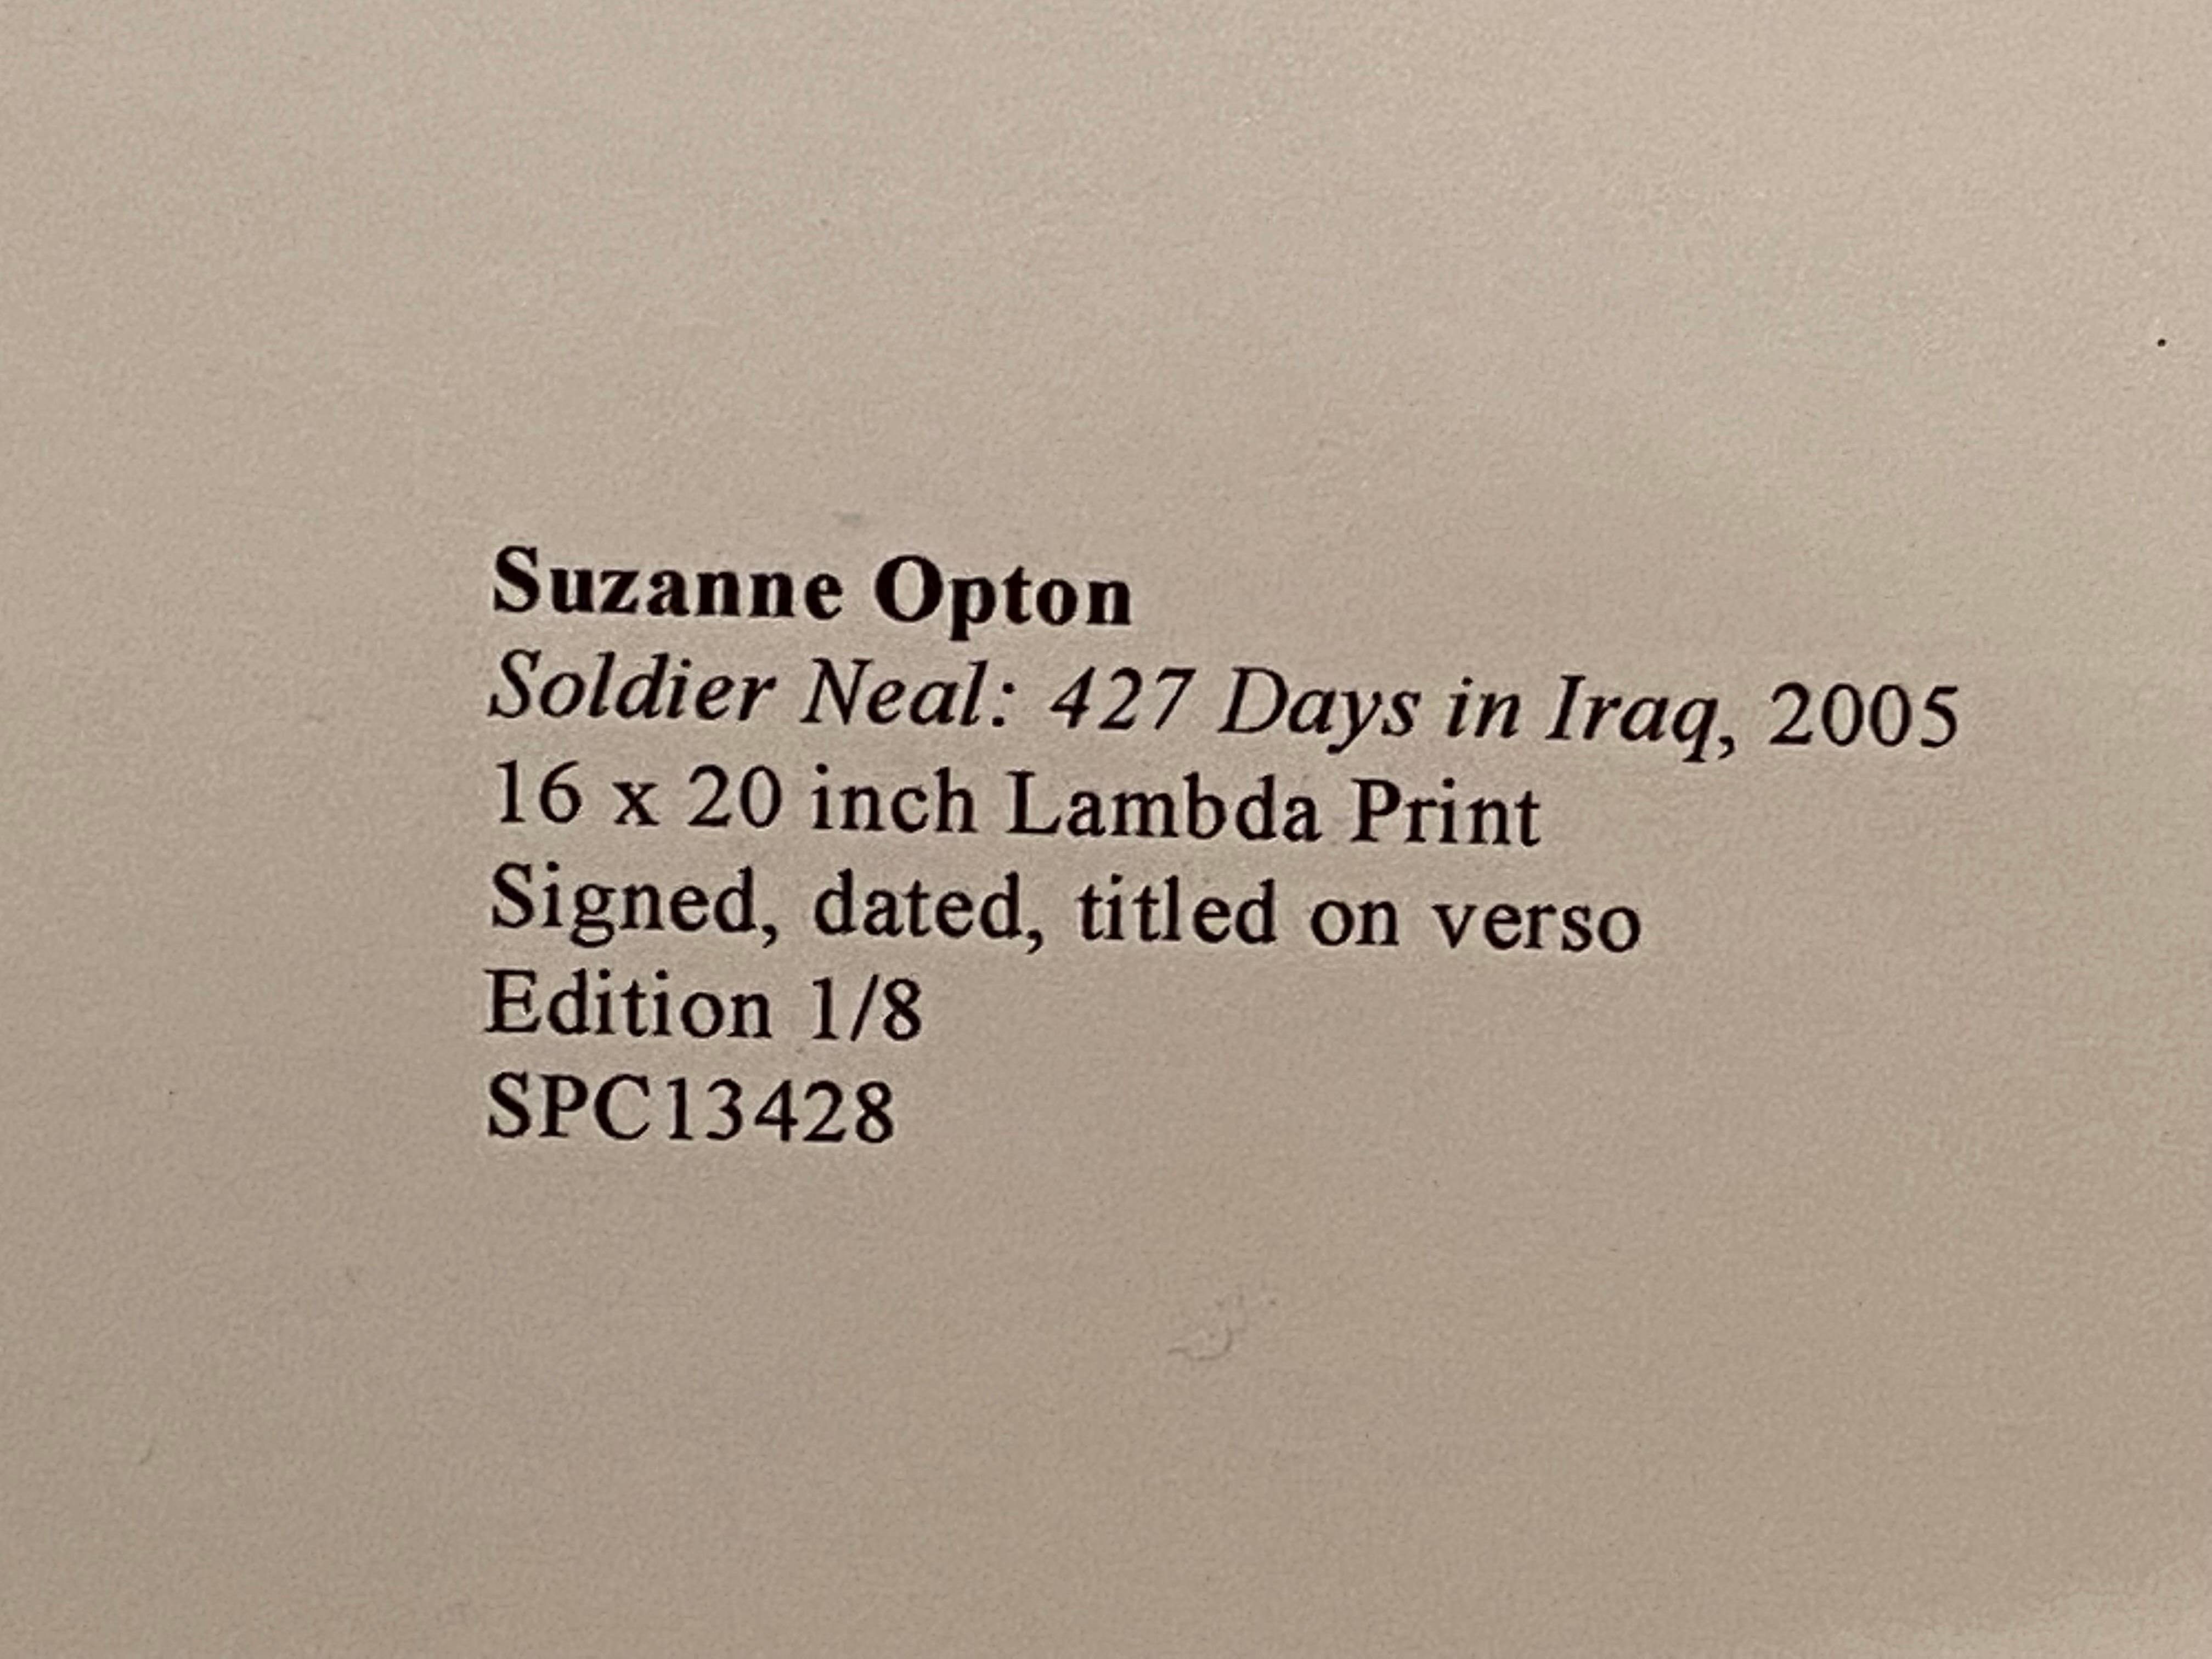 Paper Suzanne Opton Soldier Neal 427 Days in Iraq, 2005 For Sale